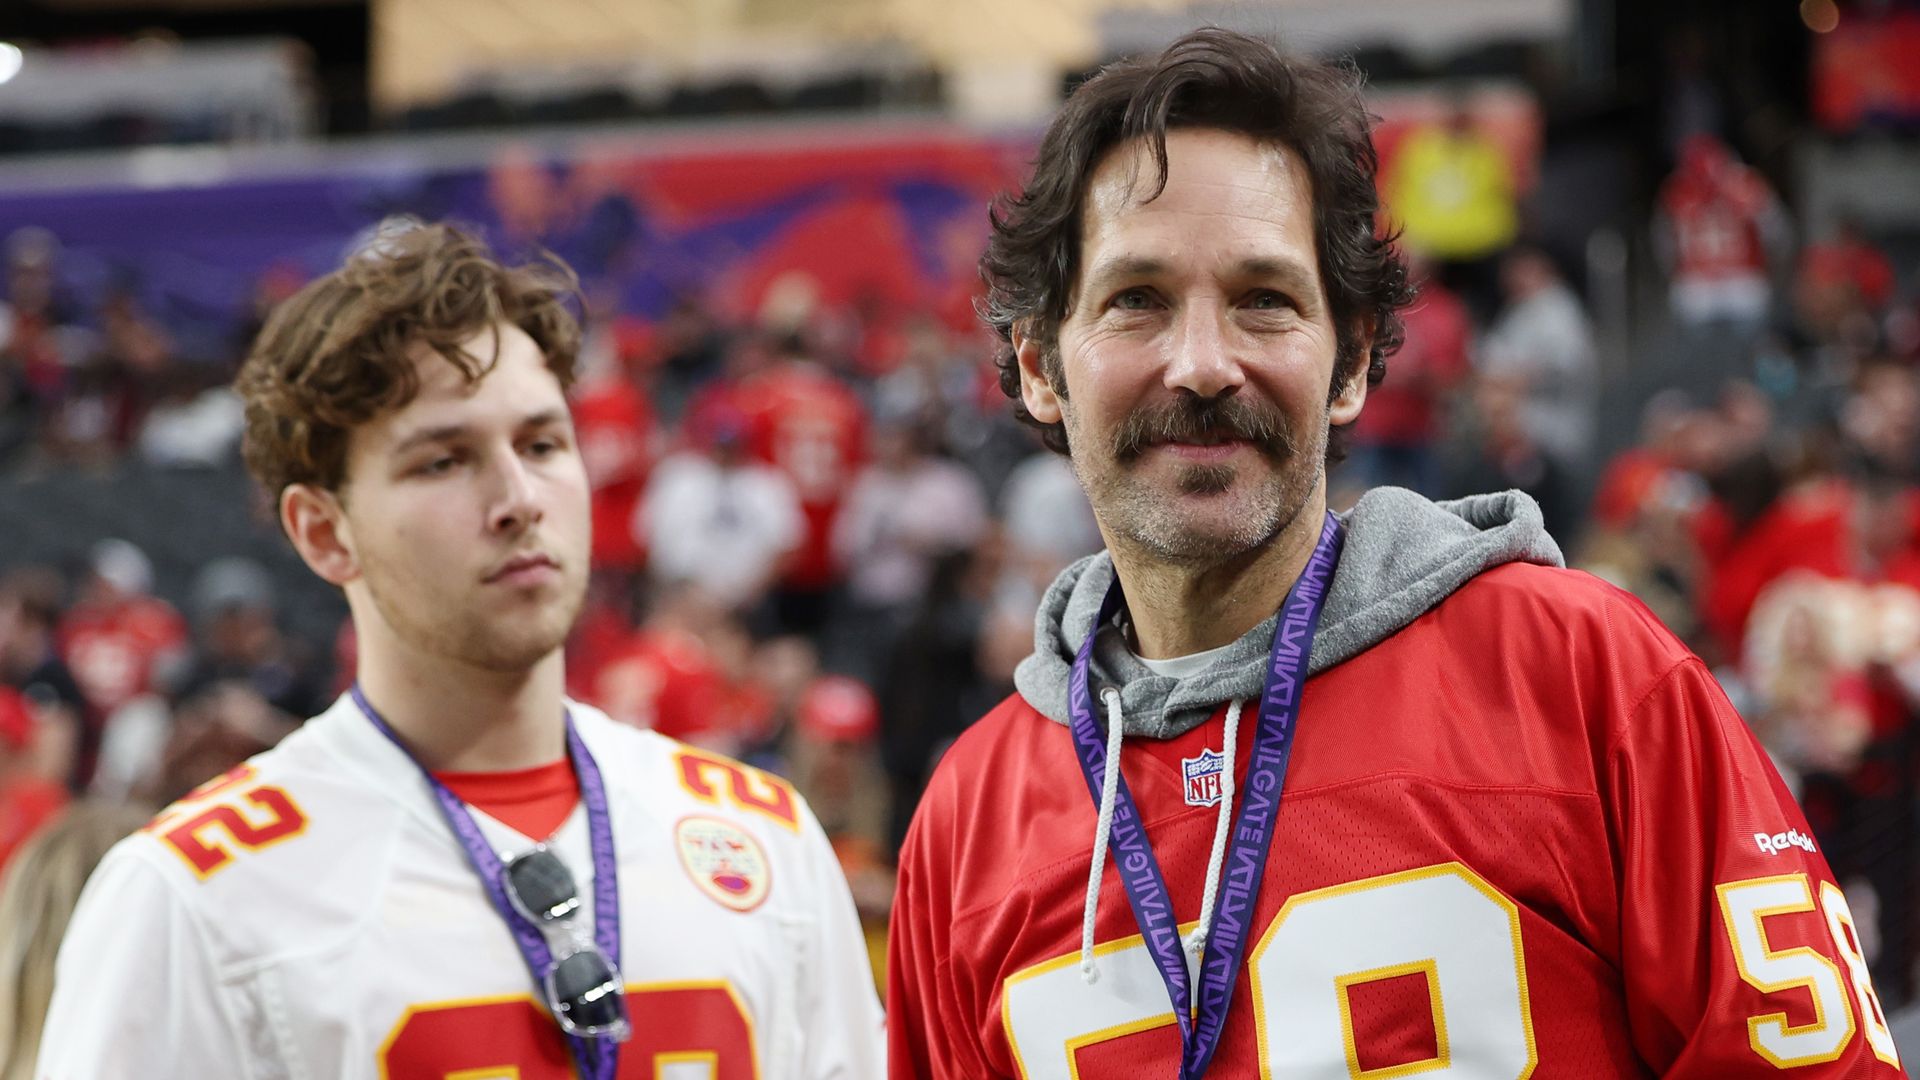 LAS VEGAS, NEVADA - FEBRUARY 11: Jack Rudd (L) and Paul Rudd attend Super Bowl LVIII between the Kansas City Chiefs and the San Francisco 49ers at Allegiant Stadium on February 11, 2024 in Las Vegas, Nevada